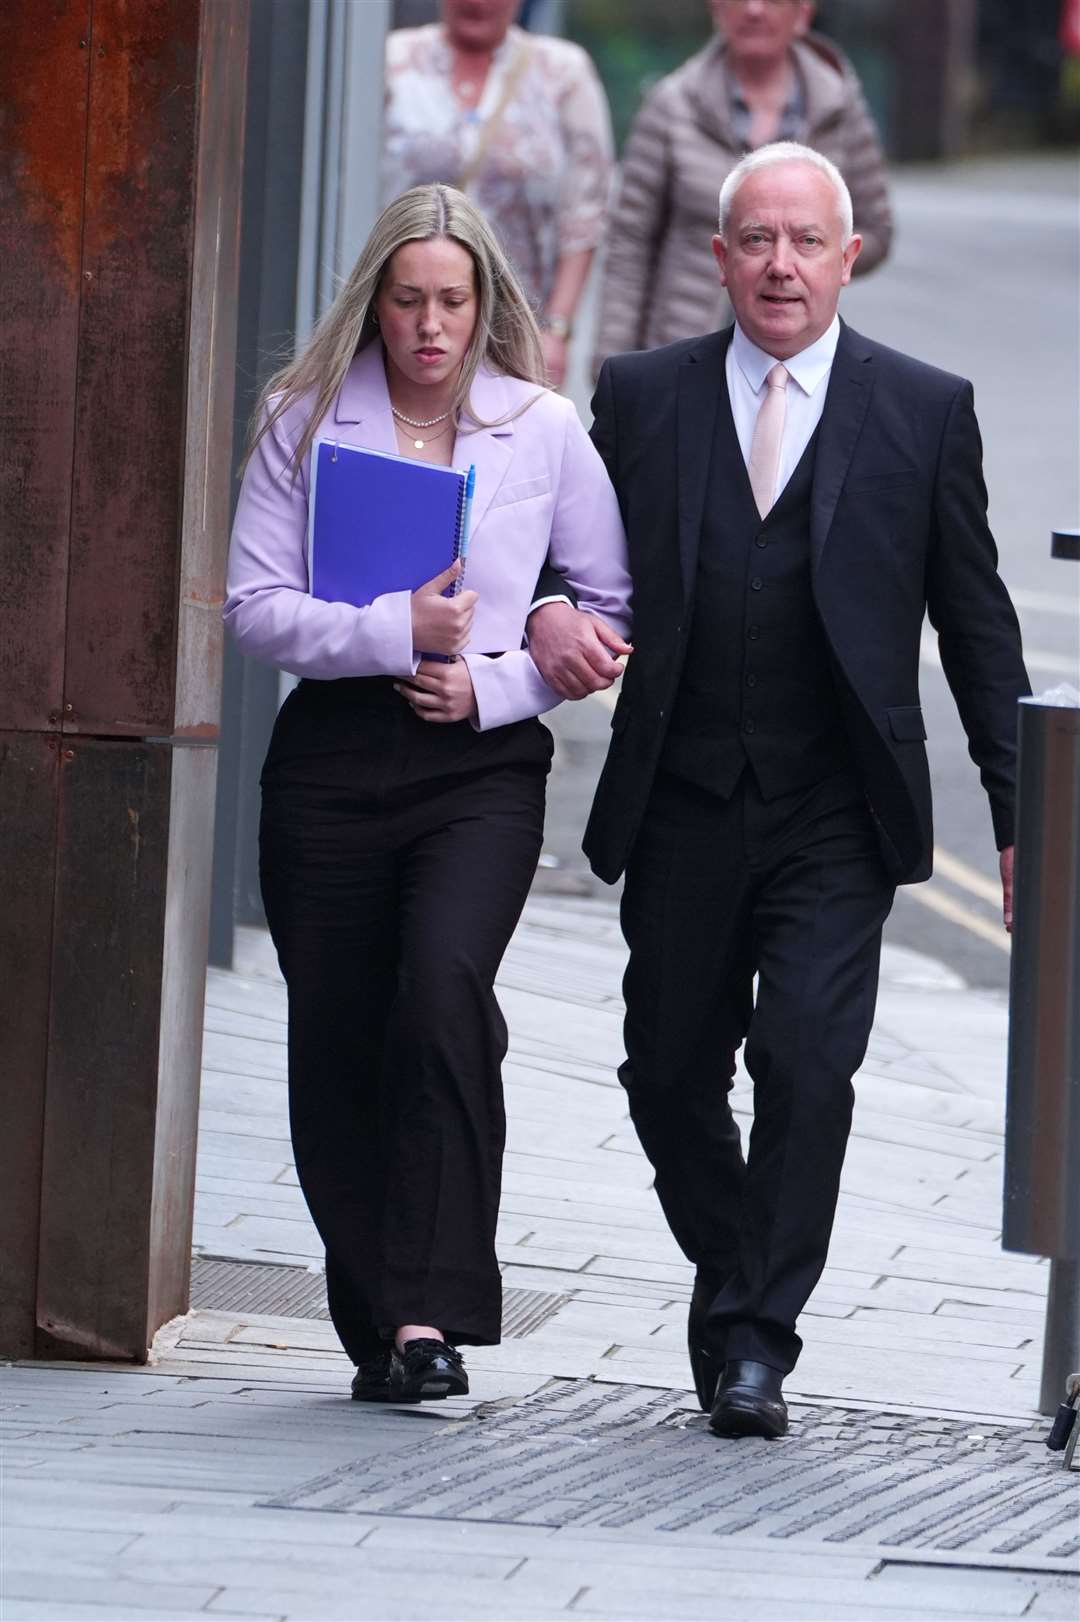 School teacher Rebecca Joynes (left) arrives at Manchester Crown Court, where she was convicted of six counts of sexual activity with two teenagers, including two counts of sexual activity while being a teacher in a position of trust (Peter Byrne/PA)